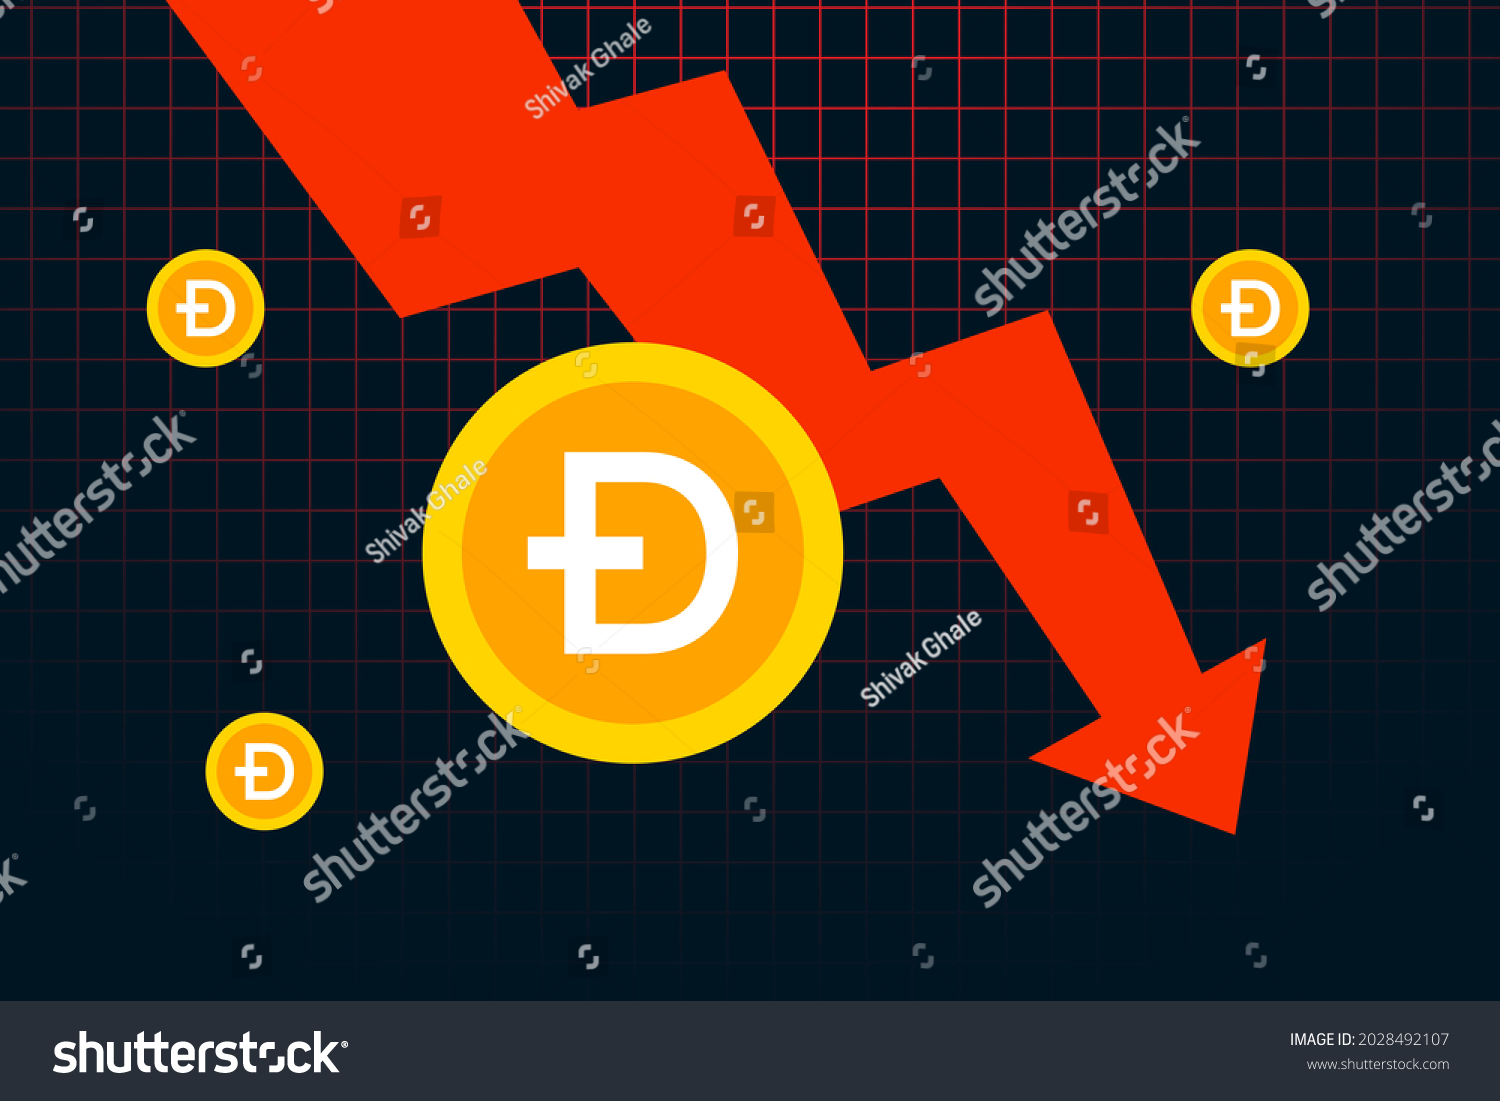 SVG of Dogecoin DOGE price falls to all time low. Dogecoin crash graph design. Red arrow shows the price of Dogecoin is going down. Vector illustration template svg